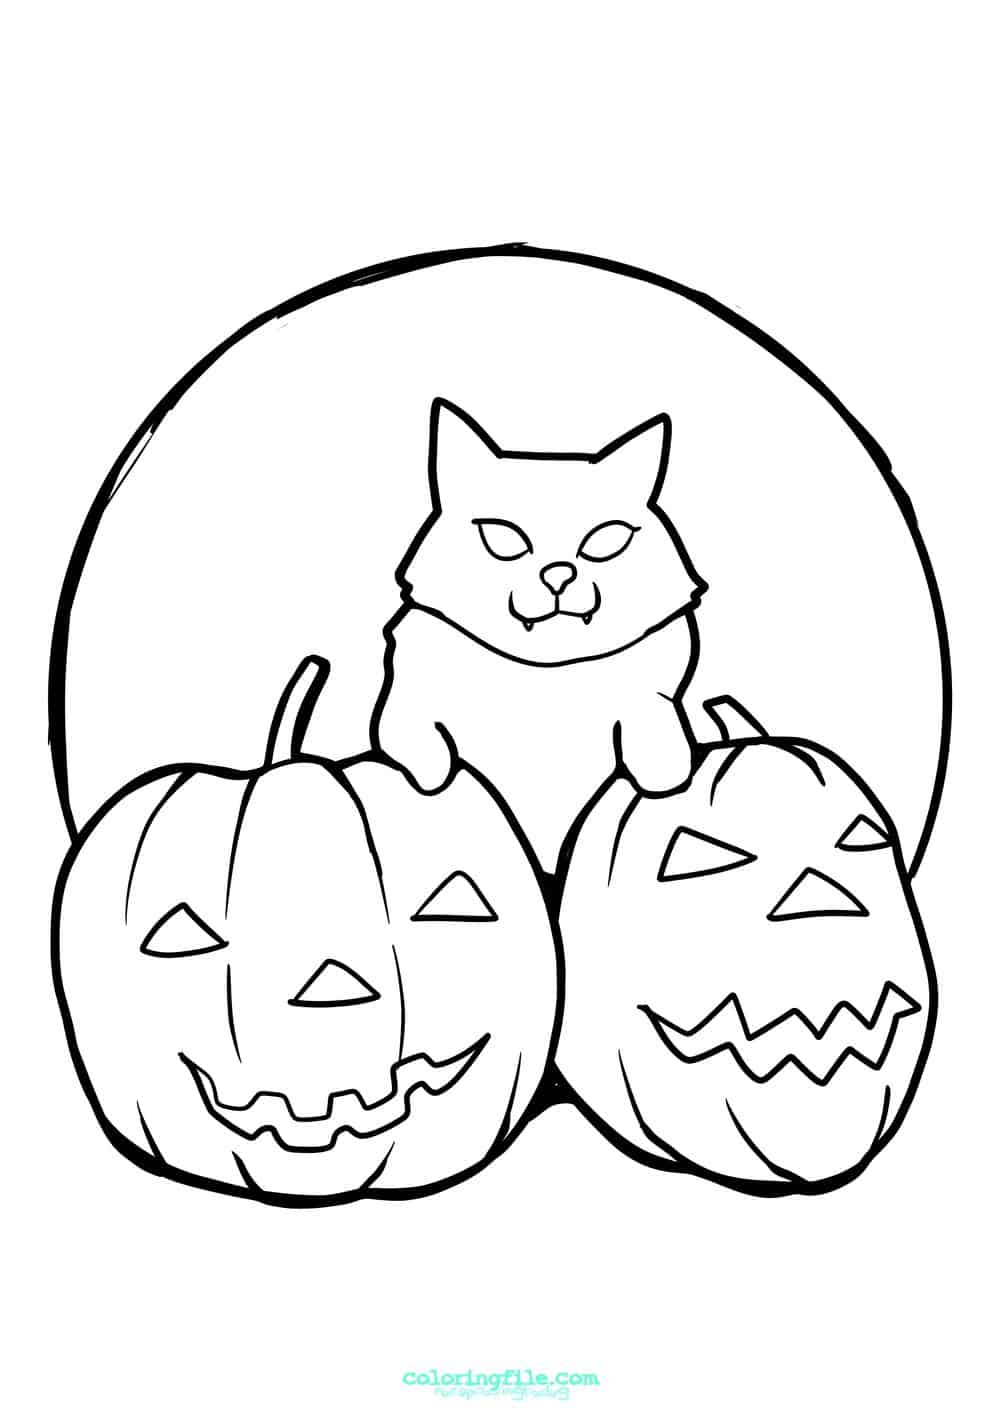 Halloween cat on pumpkins coloring pages